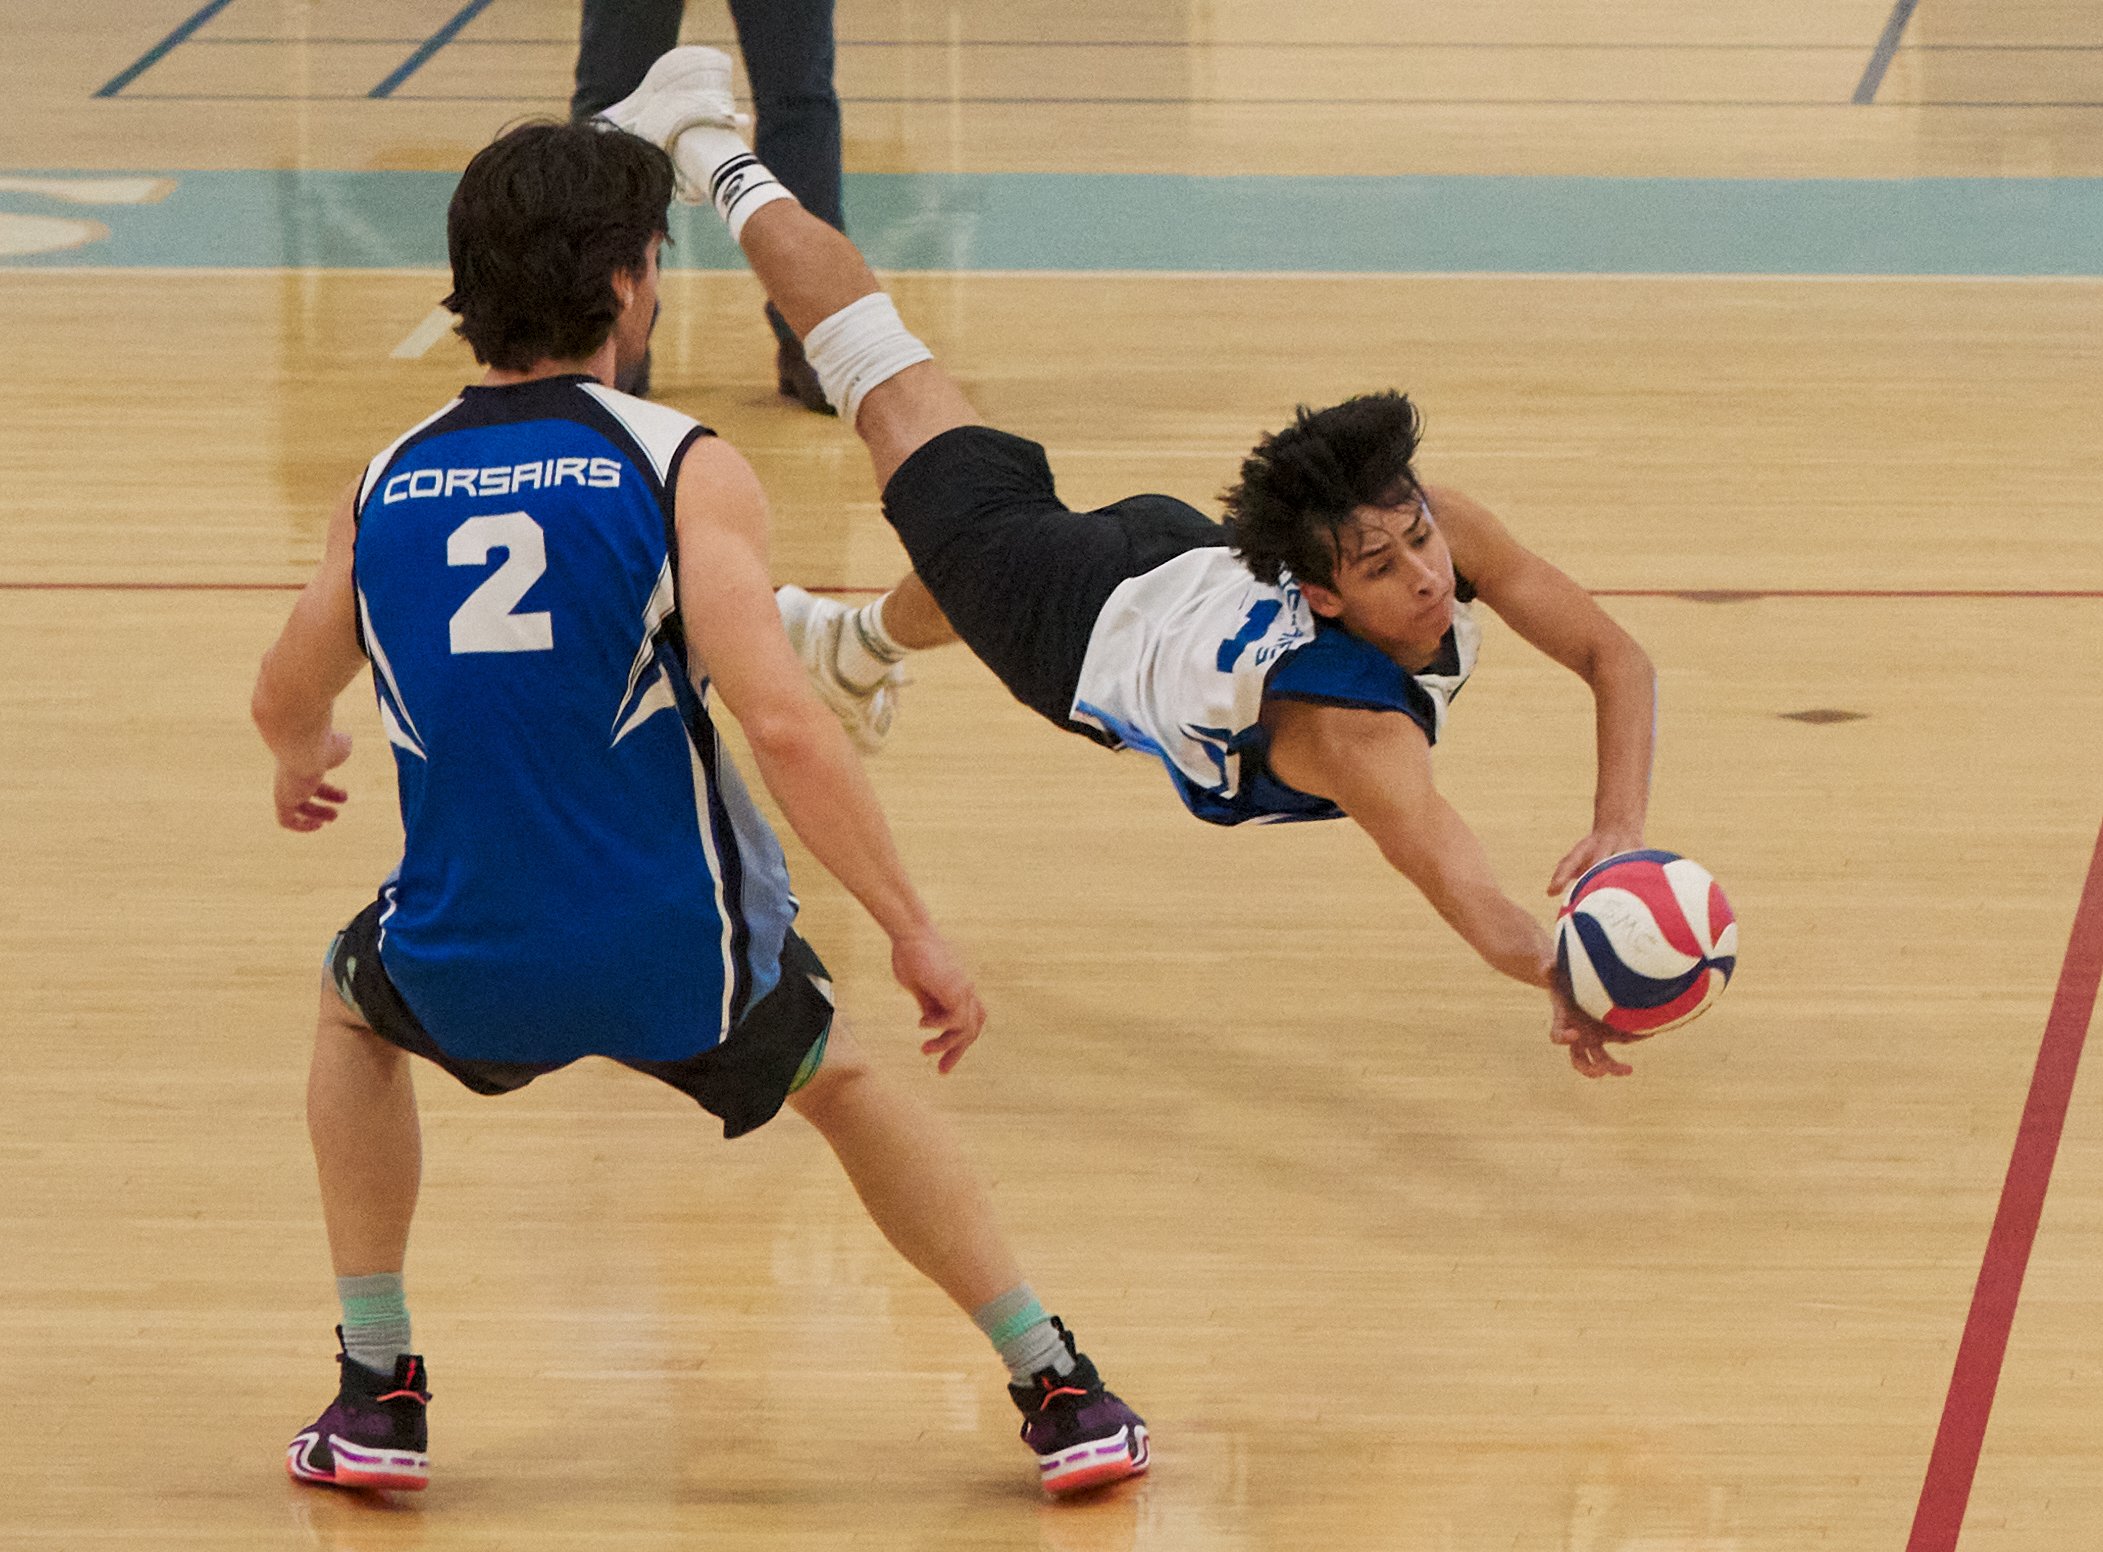  Santa Monica College Corsairs' Javier Castillo dives for the ball during the men's volleyball during the men's volleyball game against the Santa Barbara City College Vaqueros. Freshman Mason Johnson also pictured. SMC won the game 3-2 on Wednesday, 